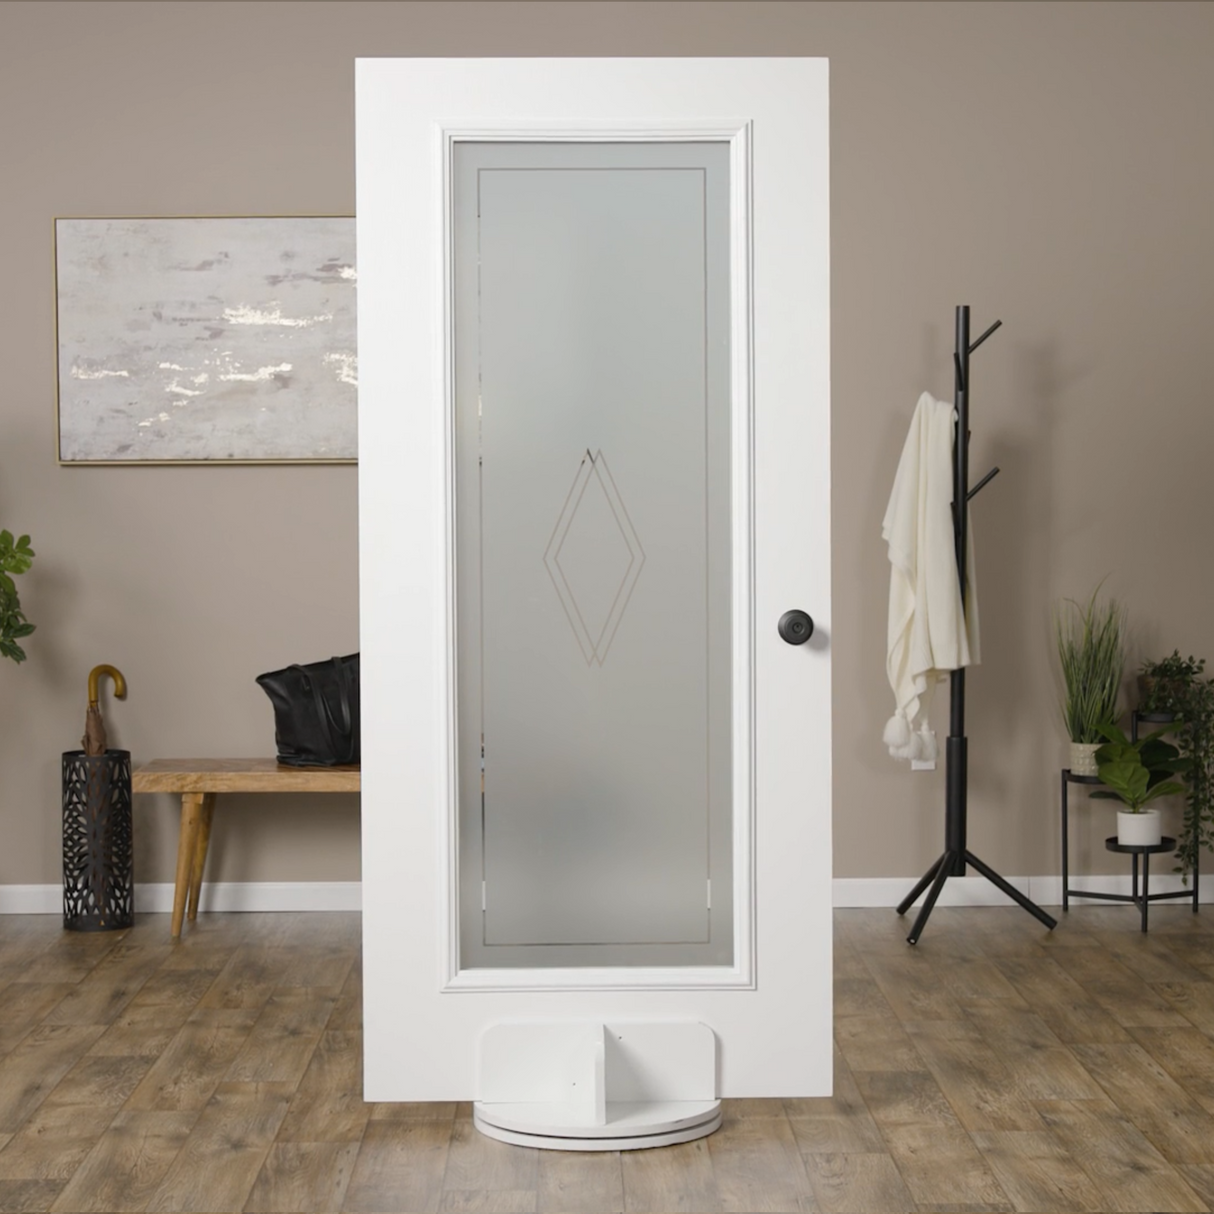 ODL Ditto Door Glass - 18" x 41.9" Frame Kit